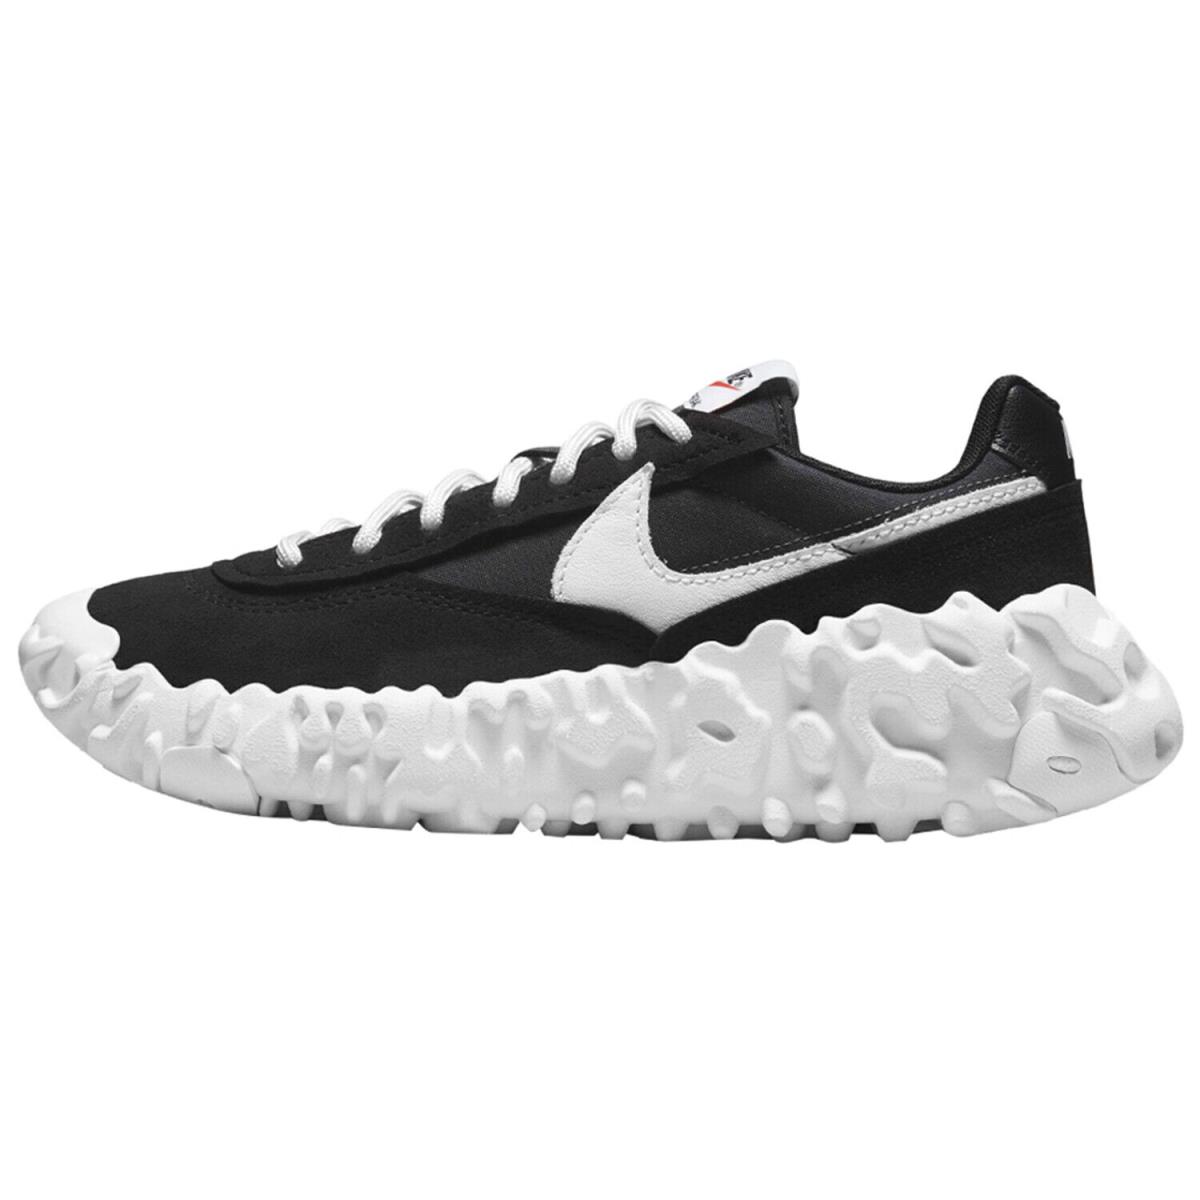 Nike Overbreak Mens DC3041-002 Black White Anthracite Running Shoes Size 8